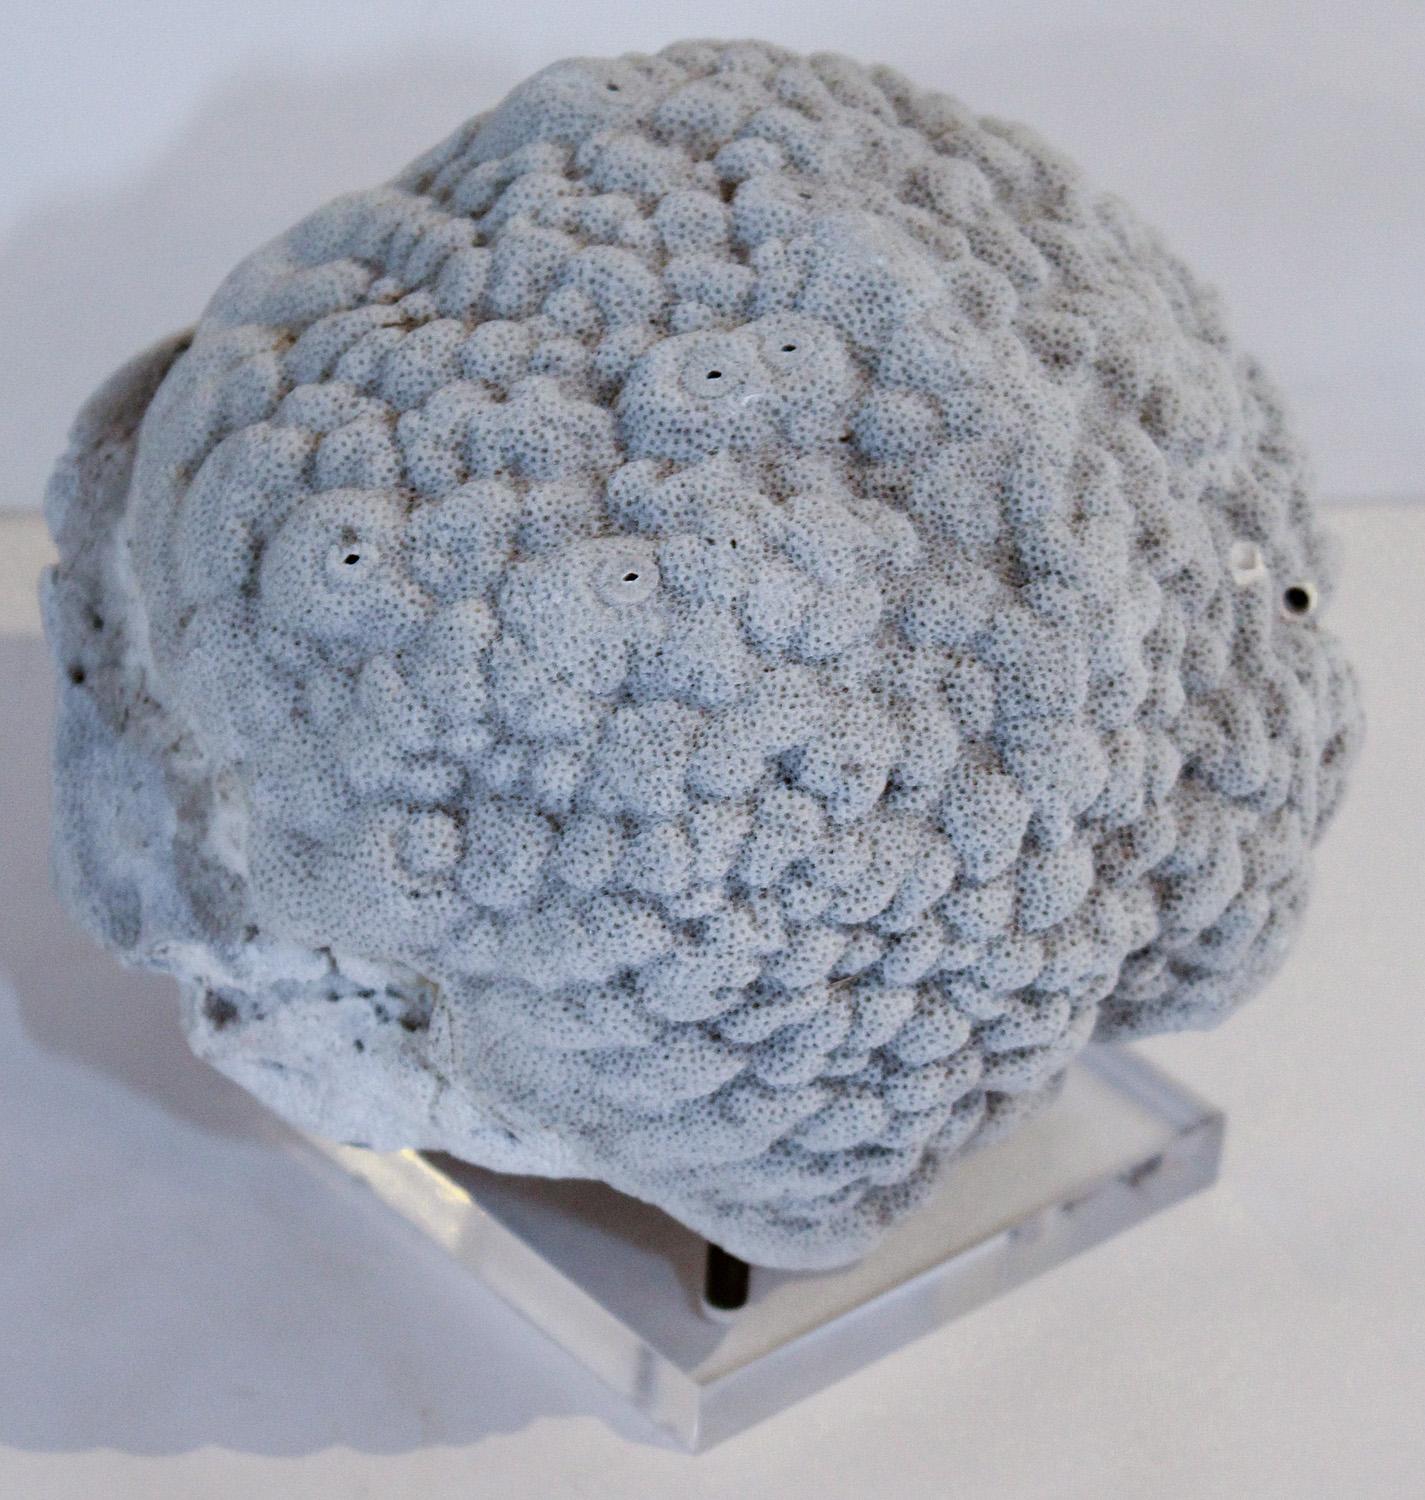 Unknown Grey Brain Coral Specimen on Acrylic and Brass Stand